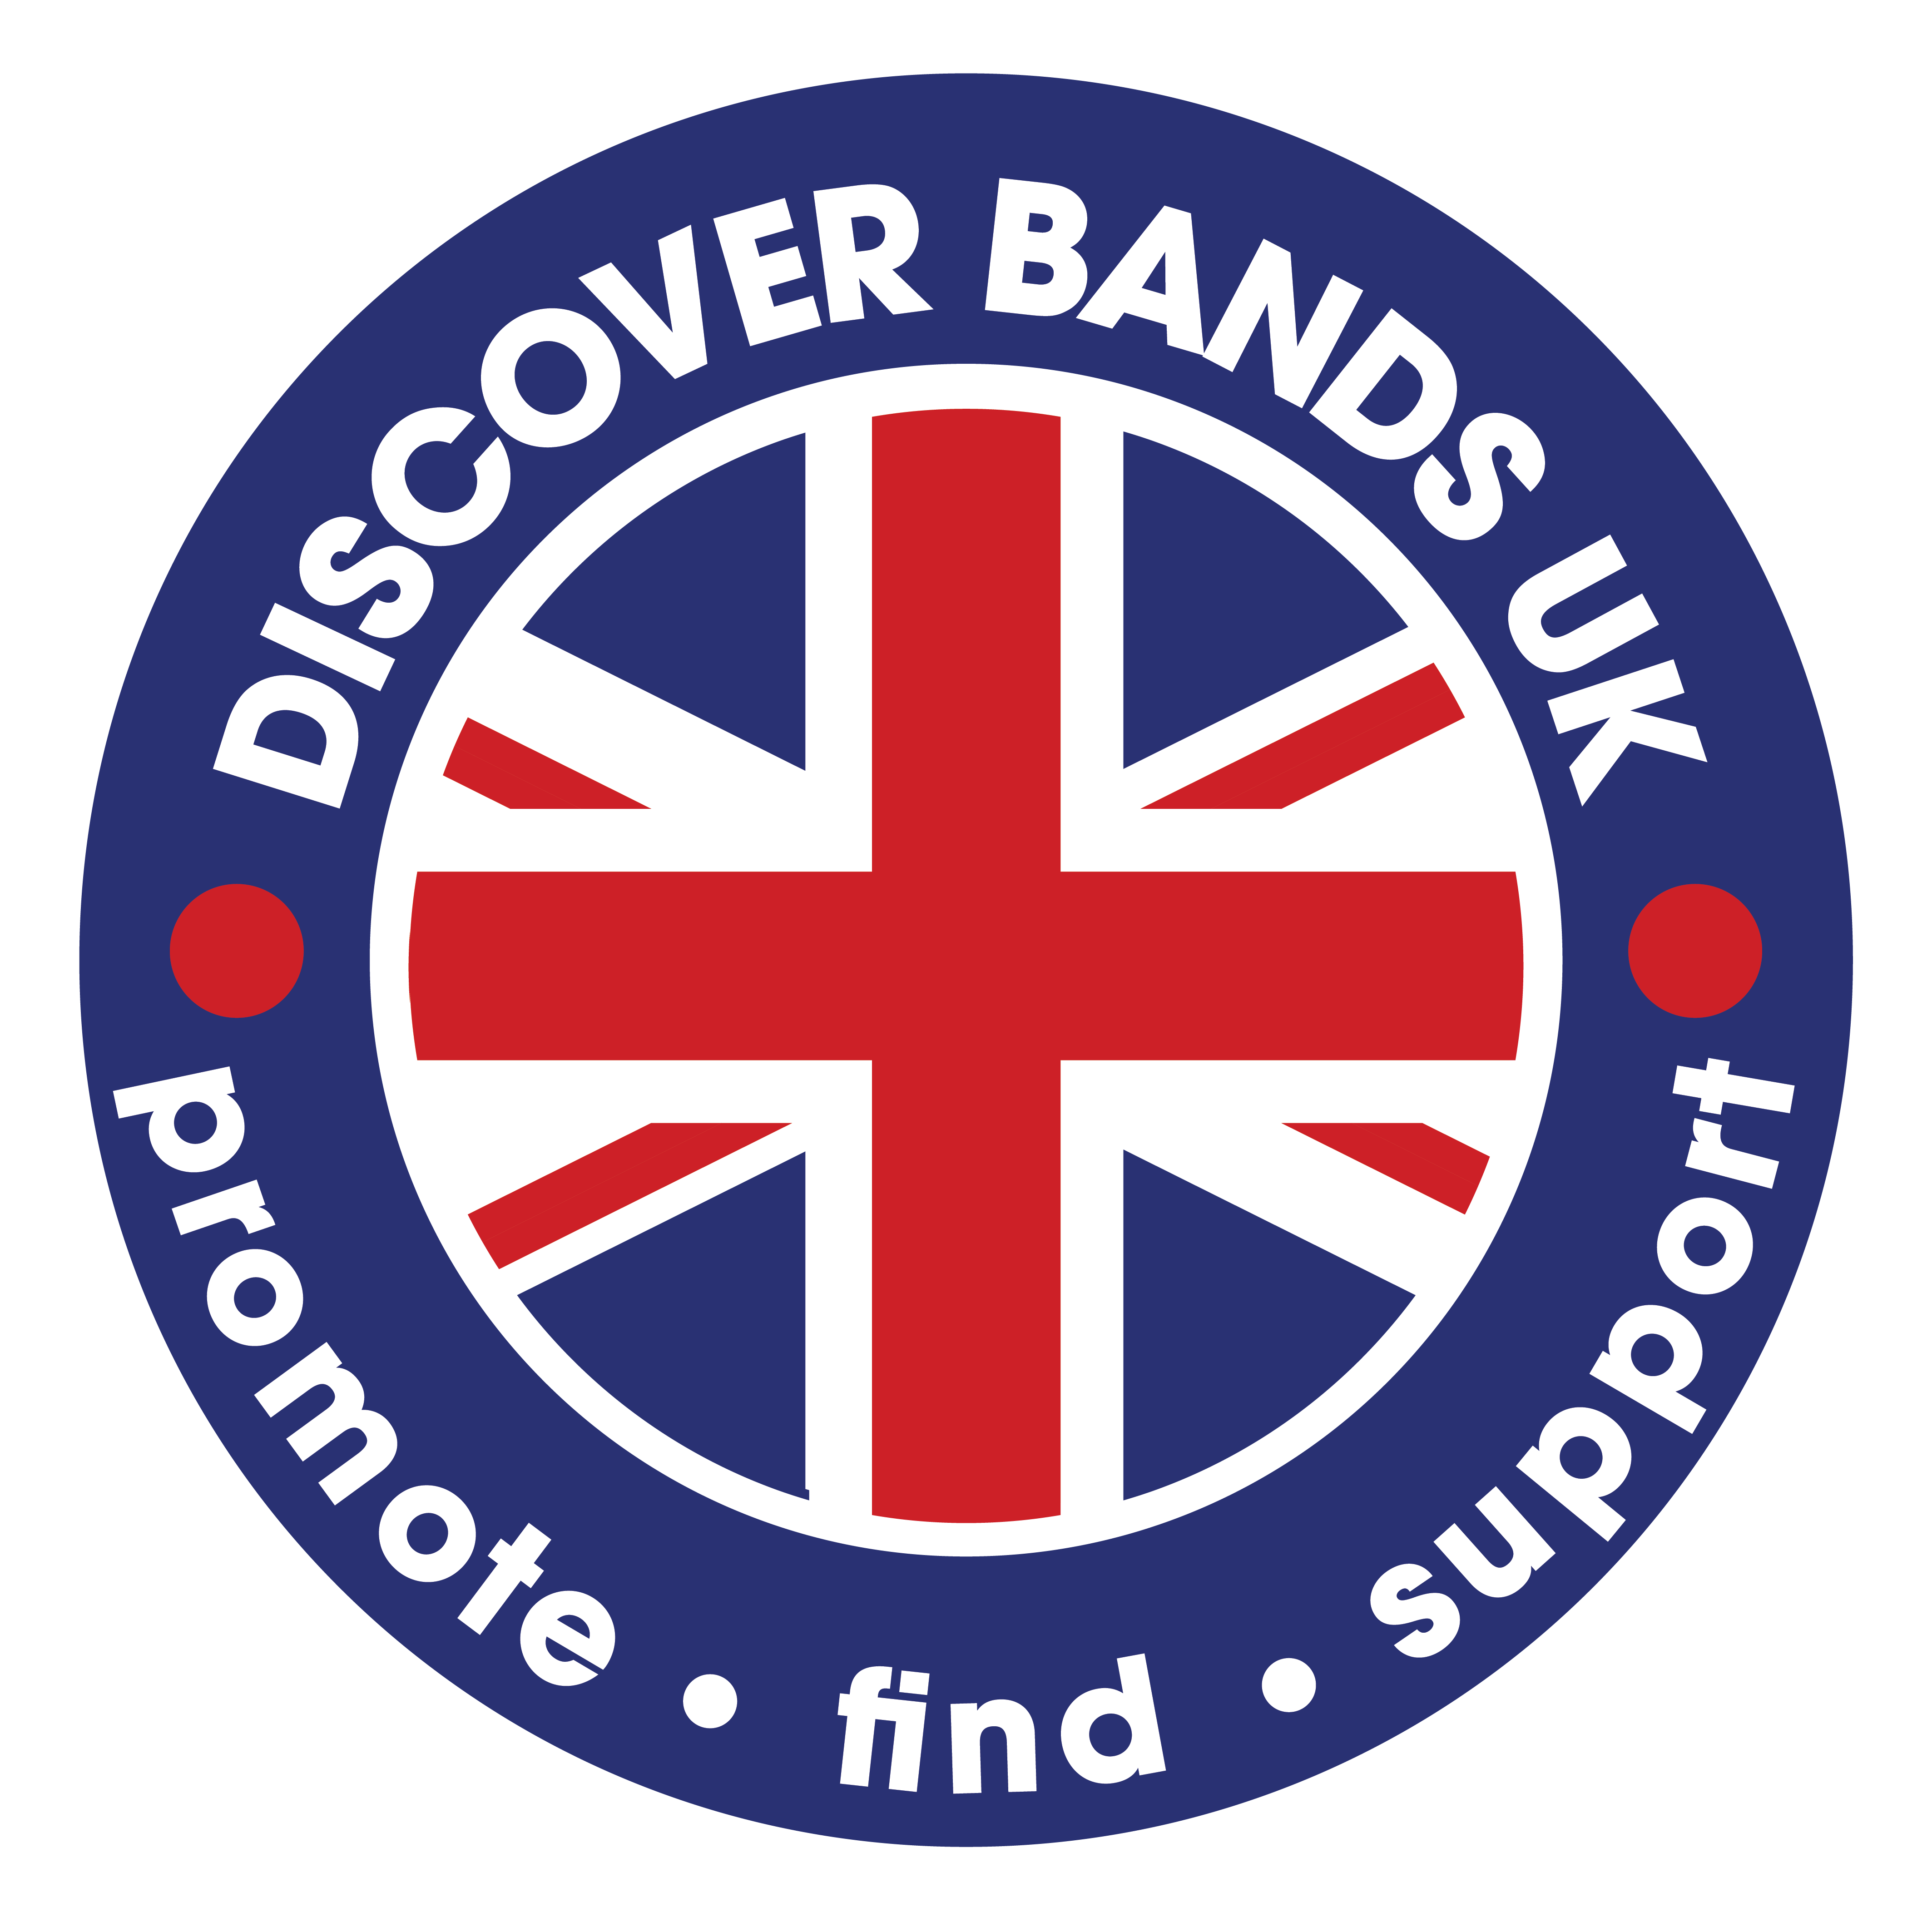 Discoverbands.co.uk